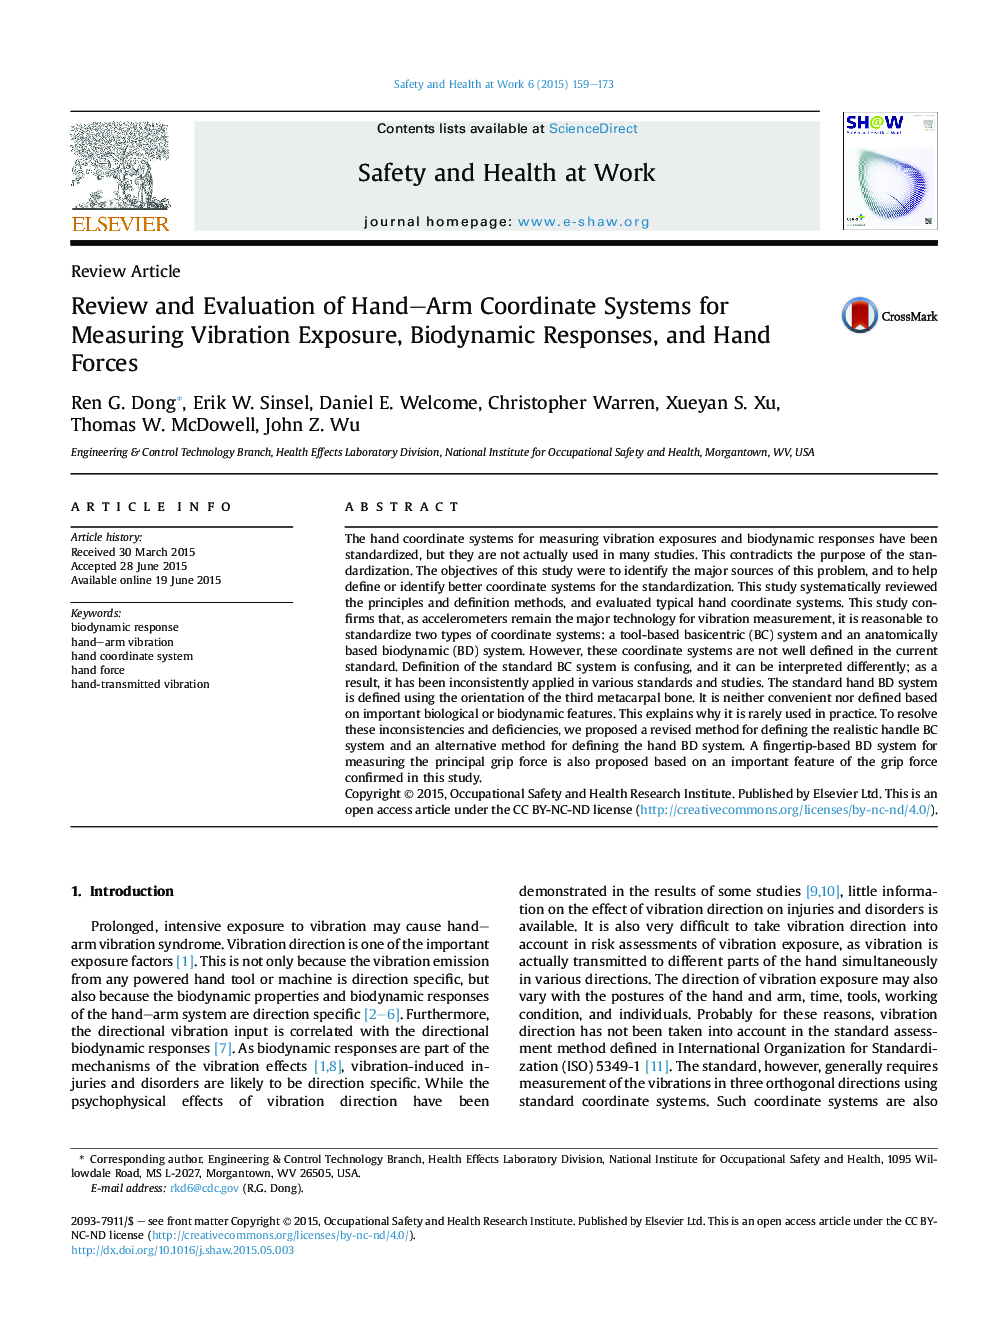 Review and Evaluation of Hand–Arm Coordinate Systems for Measuring Vibration Exposure, Biodynamic Responses, and Hand Forces 